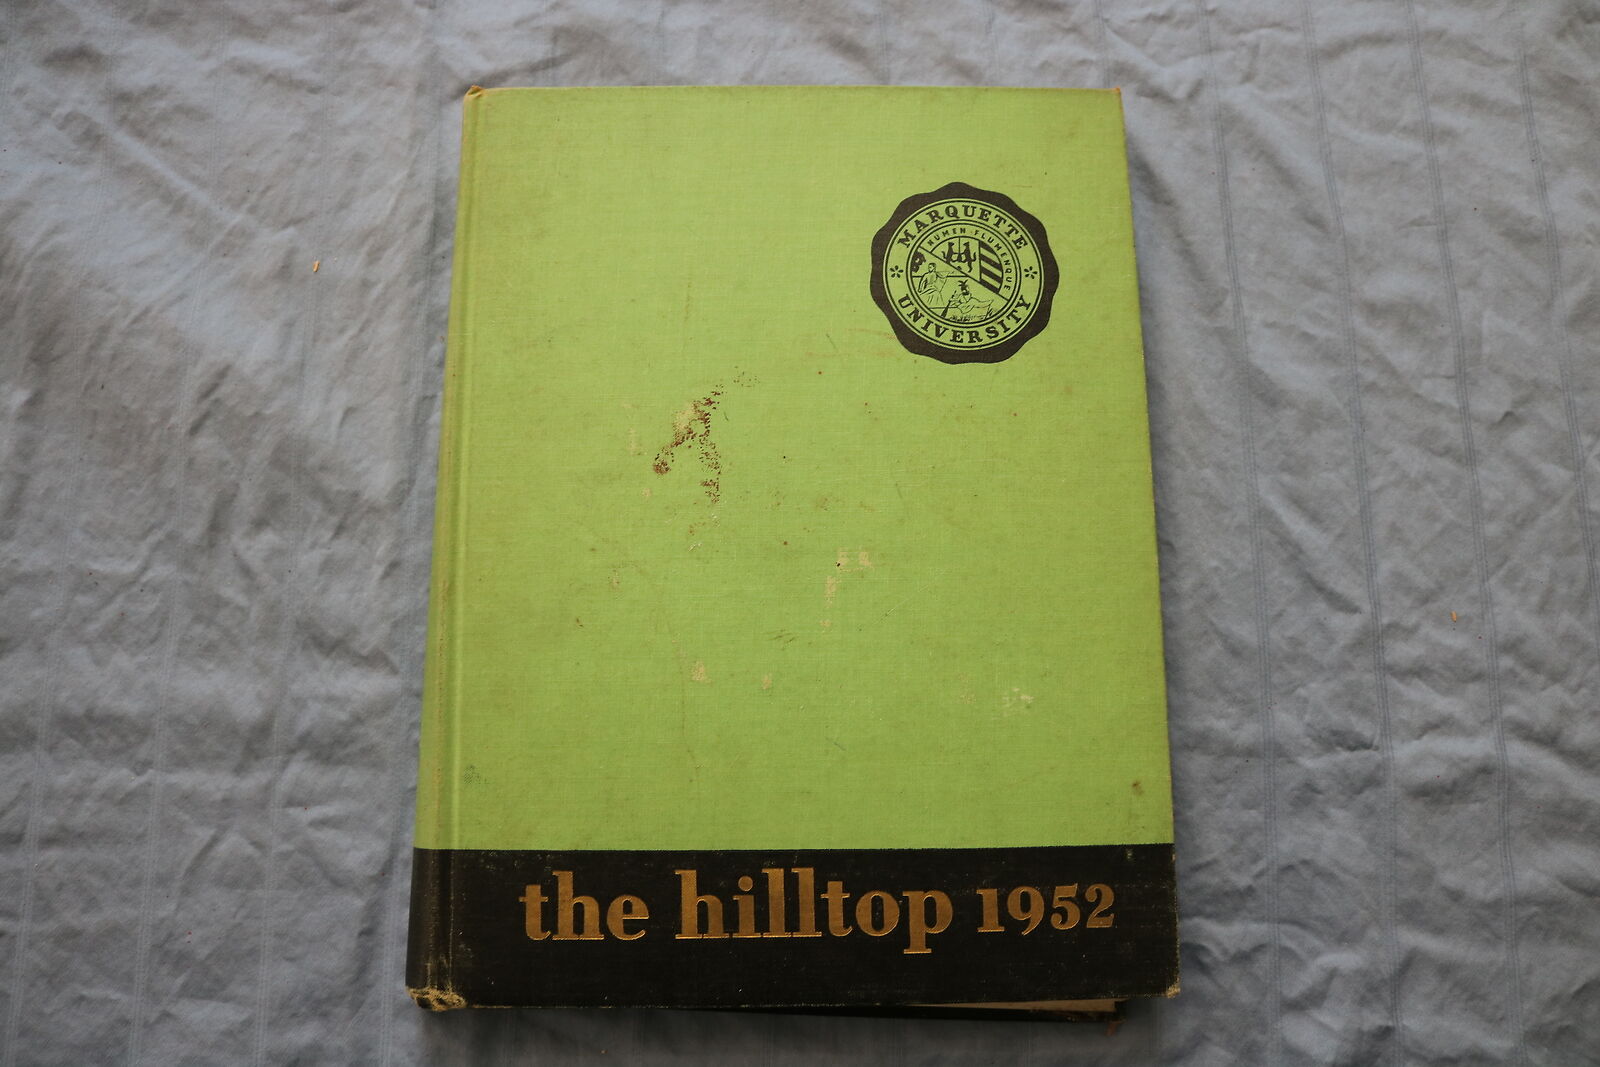 1953 THE HILLTOP MARQUETTE UNIVERSITY YEARBOOK - MILWAUKEE, WISCONSIN - YB 3411